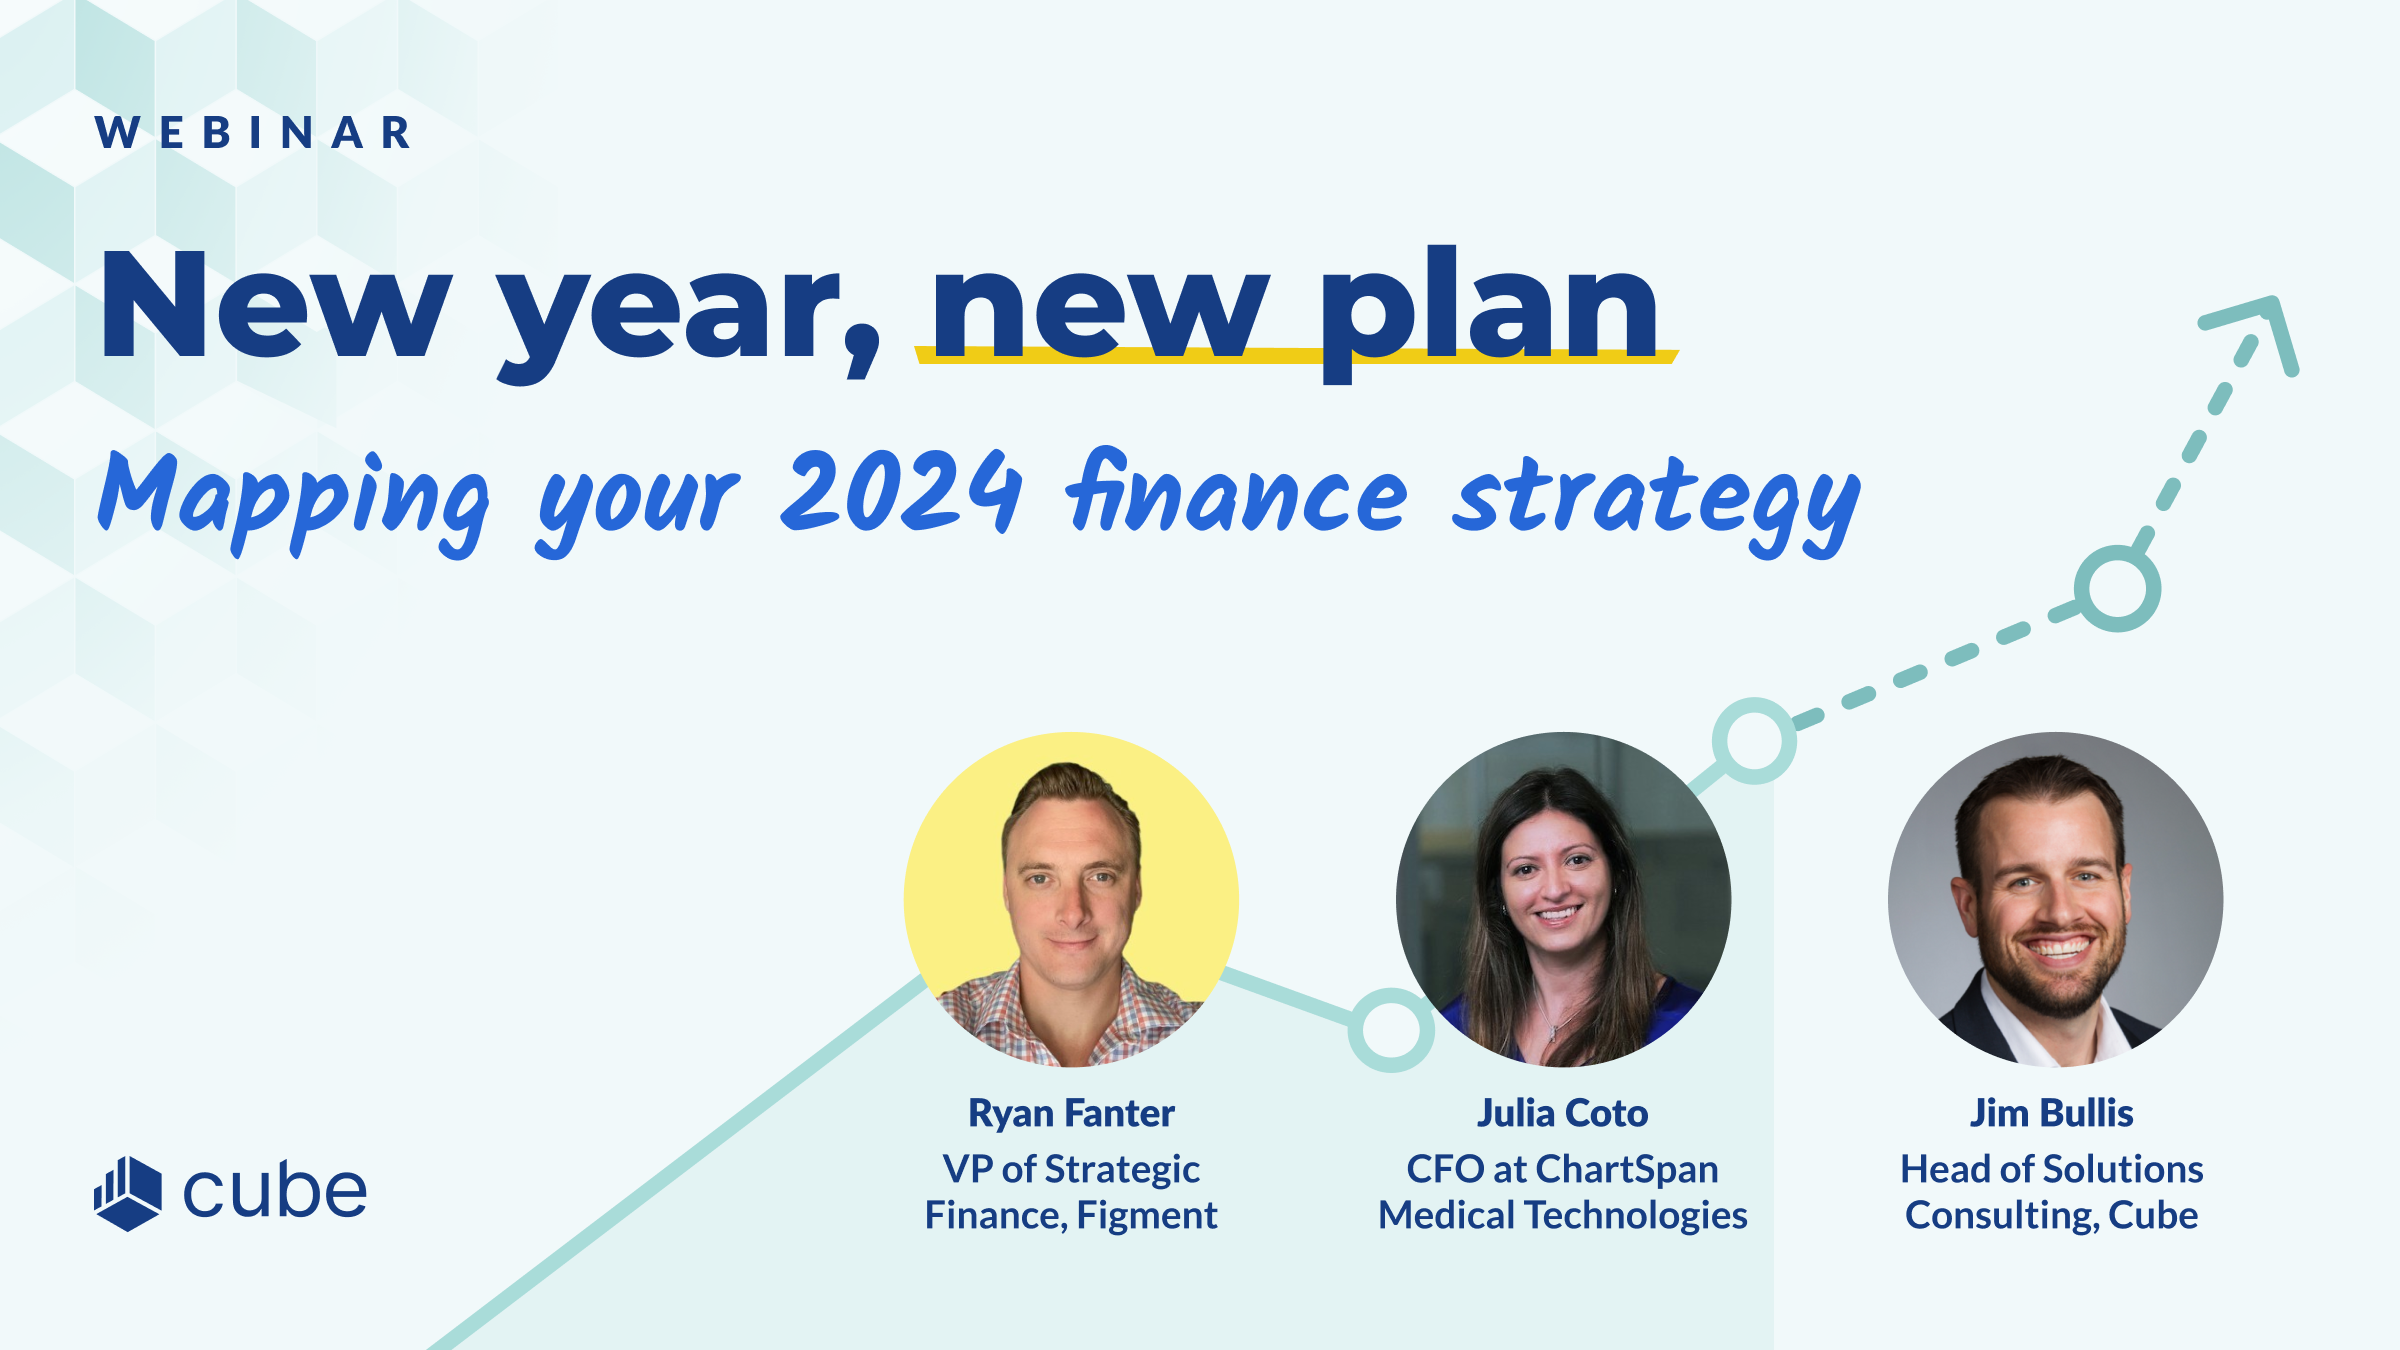 New year, new plan: mapping your 2024 finance strategy